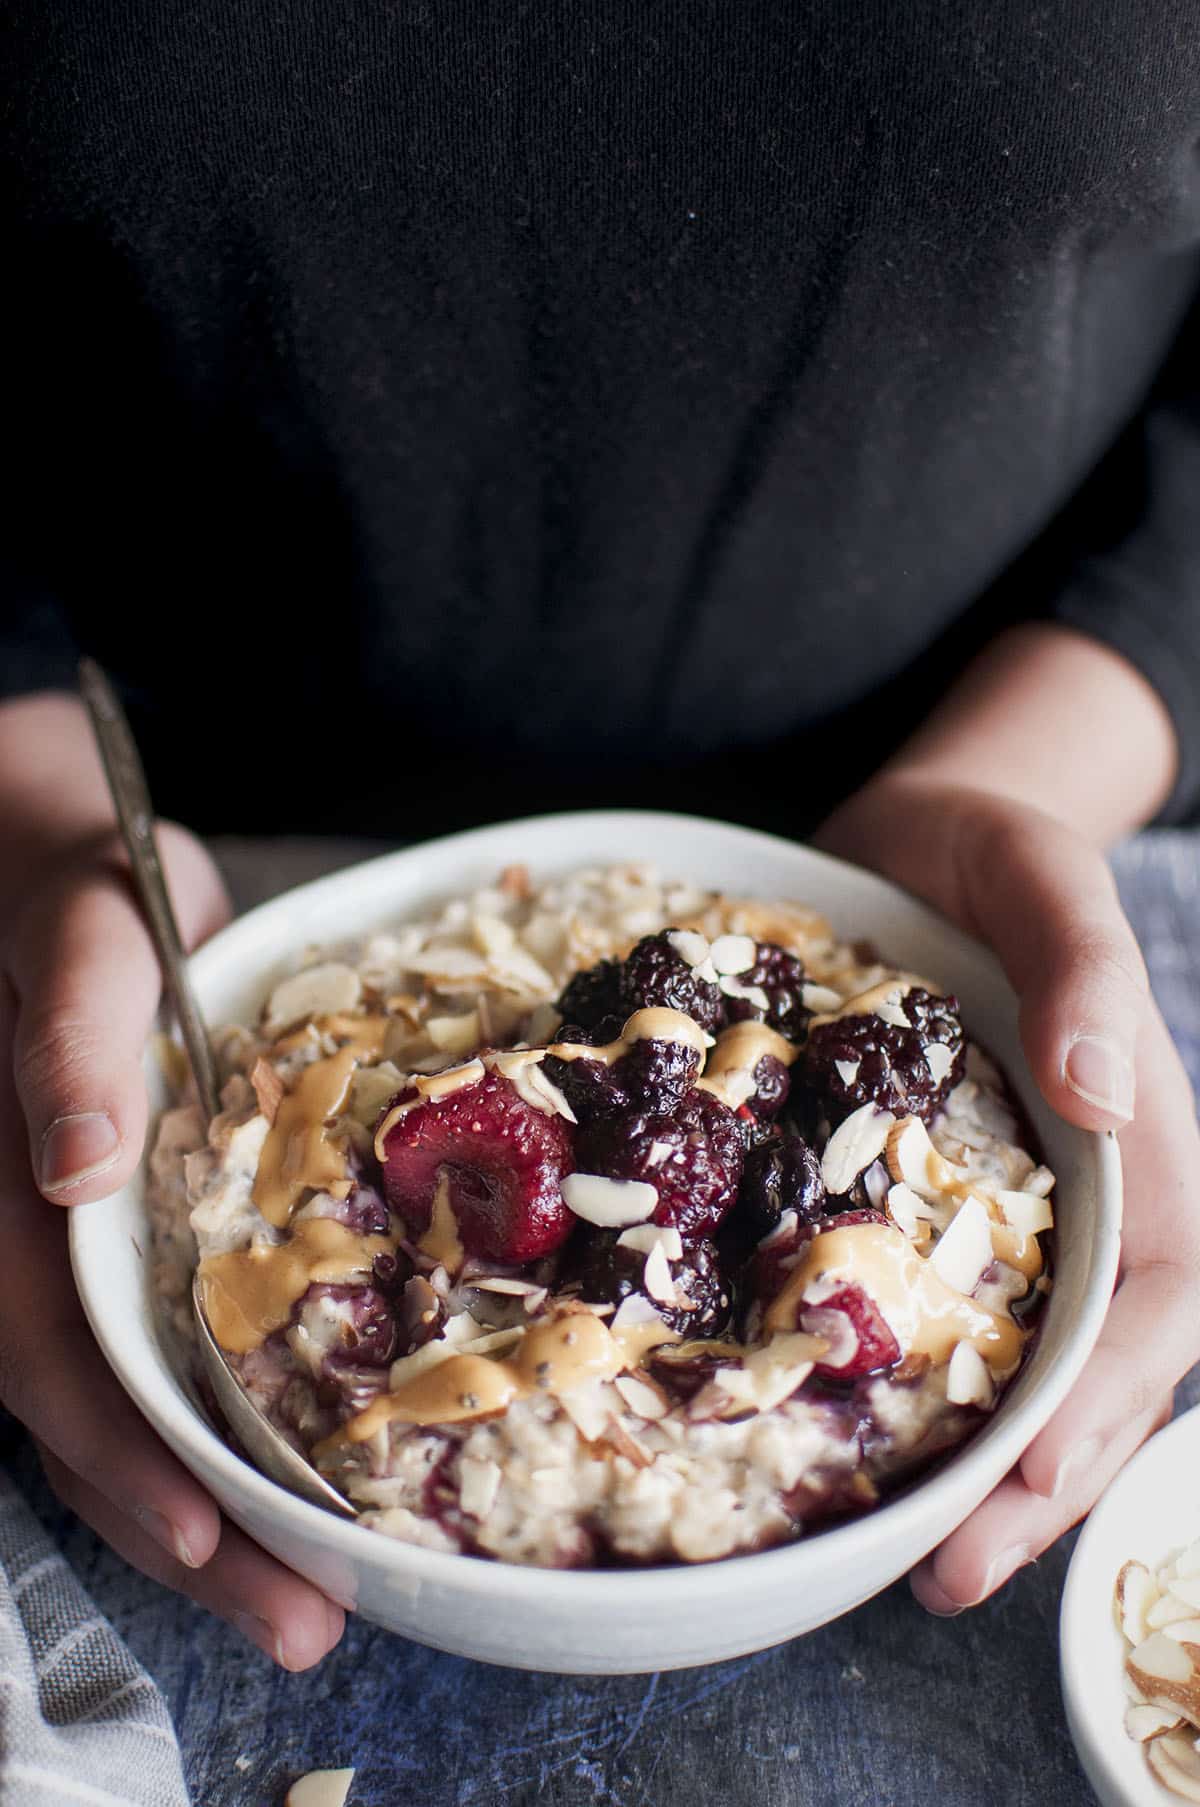 Hands holding gray bowl with oatmeal porridge with topping.